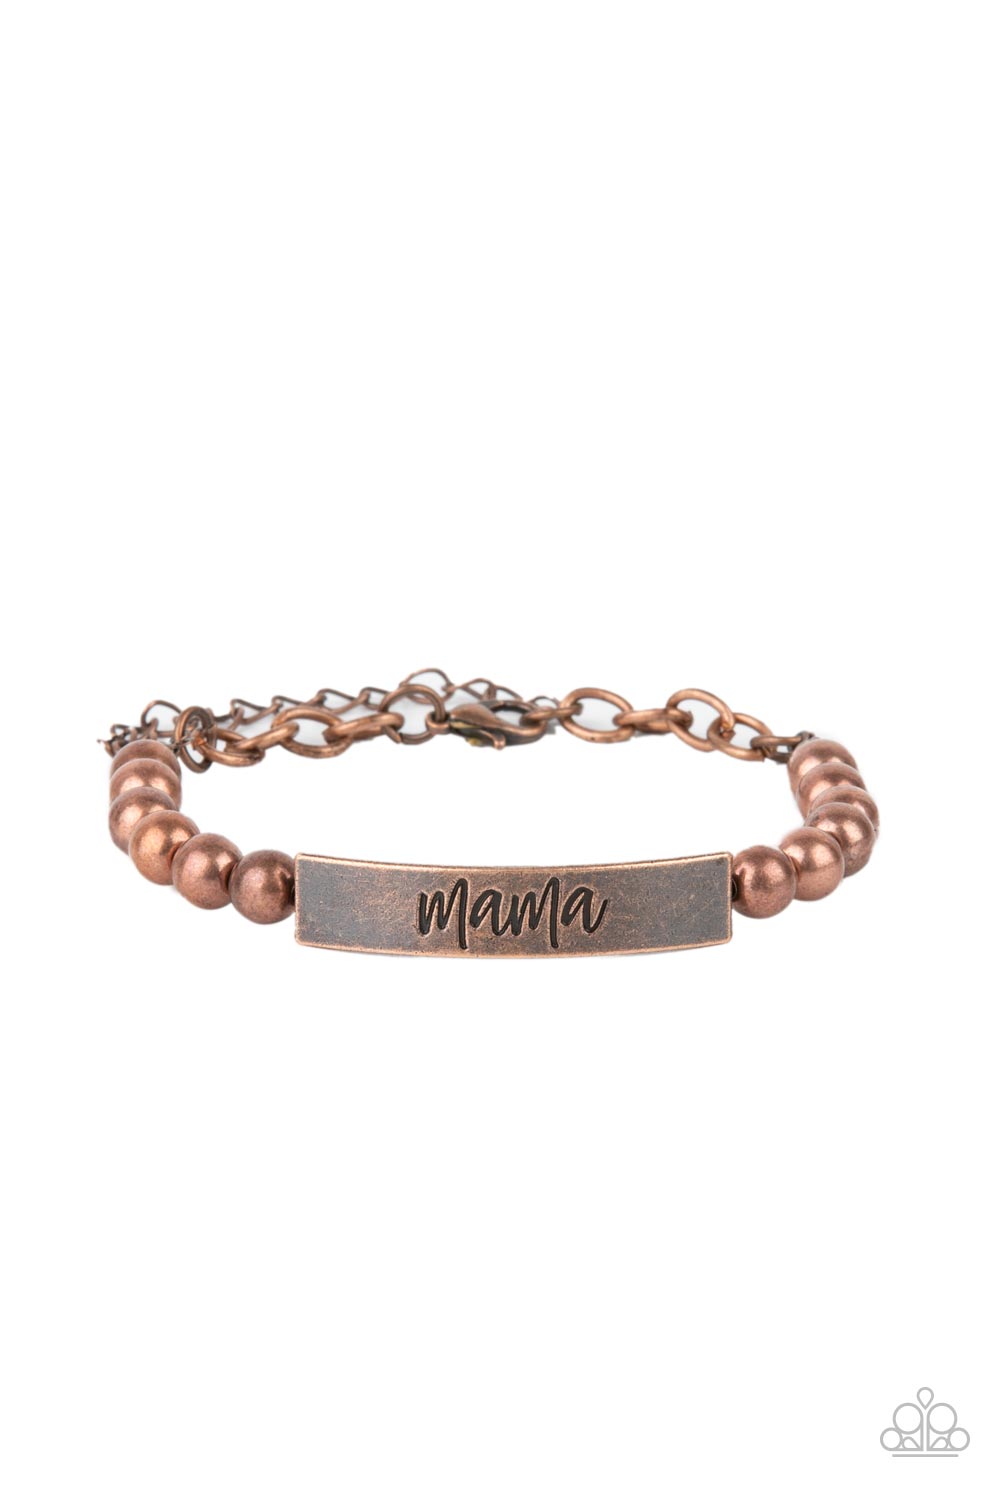 Mom Squad - Copper Bead Bracelets stamped in the word, "Mama," a curved copper plate attaches to strands of copper beads threaded along invisible wire around the wrist, creating a sentimental centerpiece. Features an adjustable clasp closure.  Sold as one individual bracelet.